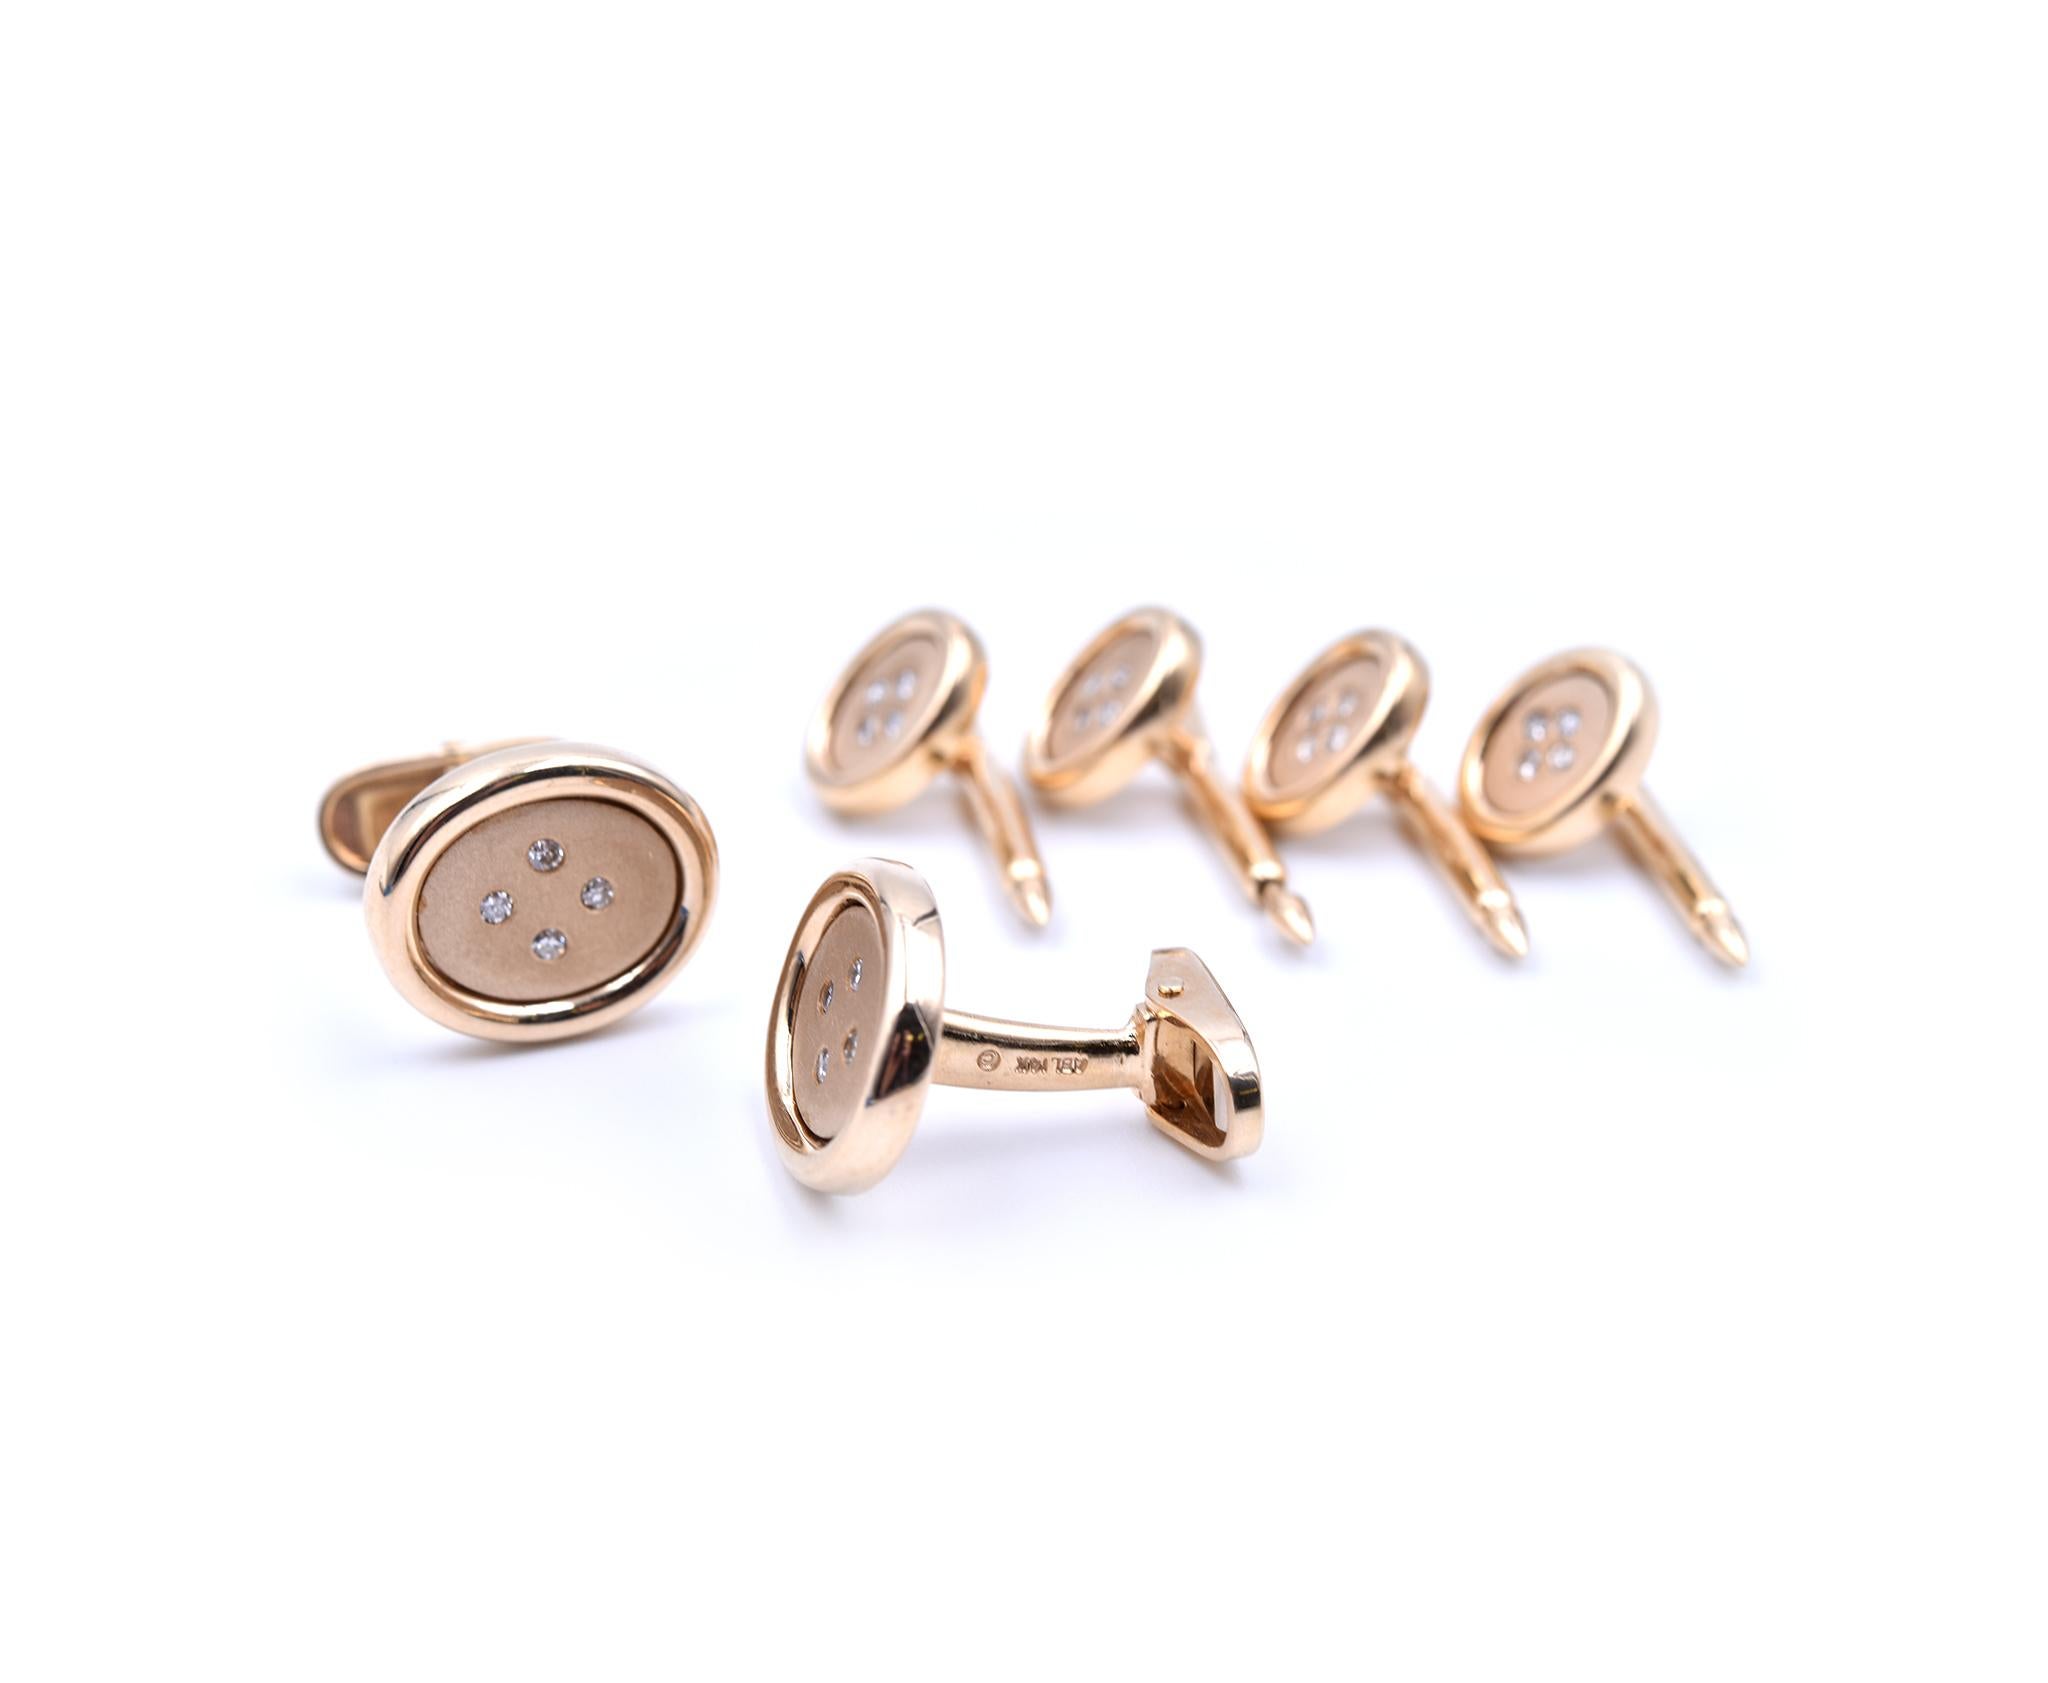 Material: 14k yellow gold
Diamonds: 24 round cuts = 0.36 carat total weight
Dimensions: each cufflink measures 14.22mm by 16.40mm, each button measures 9.75mm by 11.60mm
Weight: 26.37 grams
